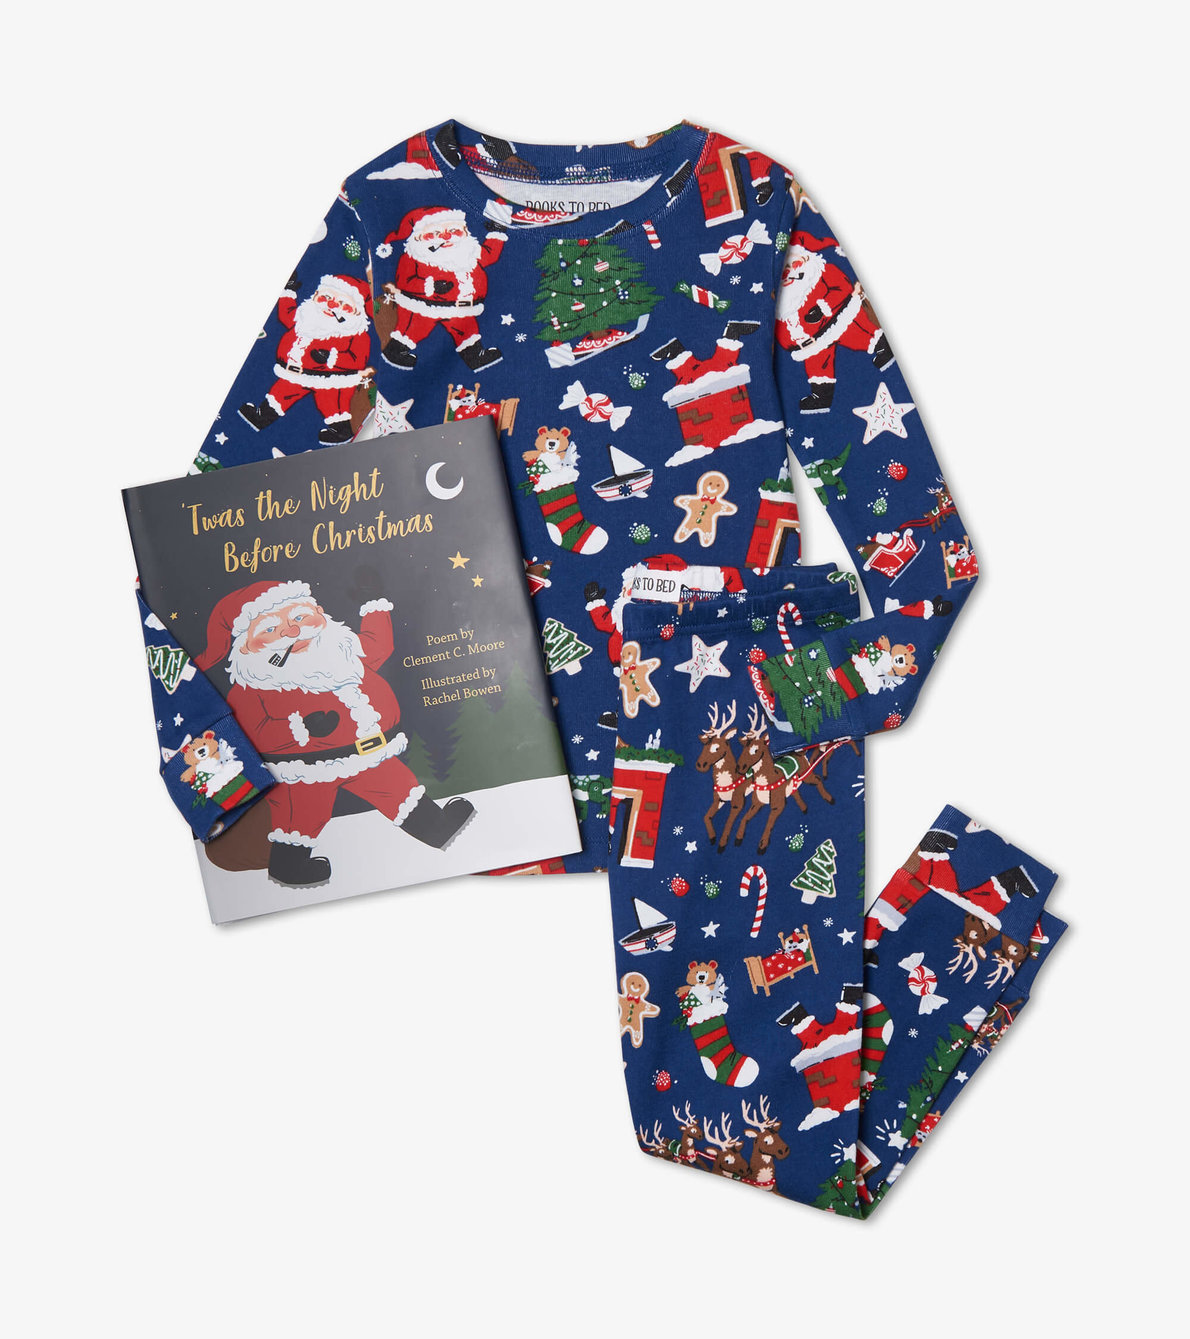 View larger image of Twas the Night Before Christmas Blue Book and Pajama Set